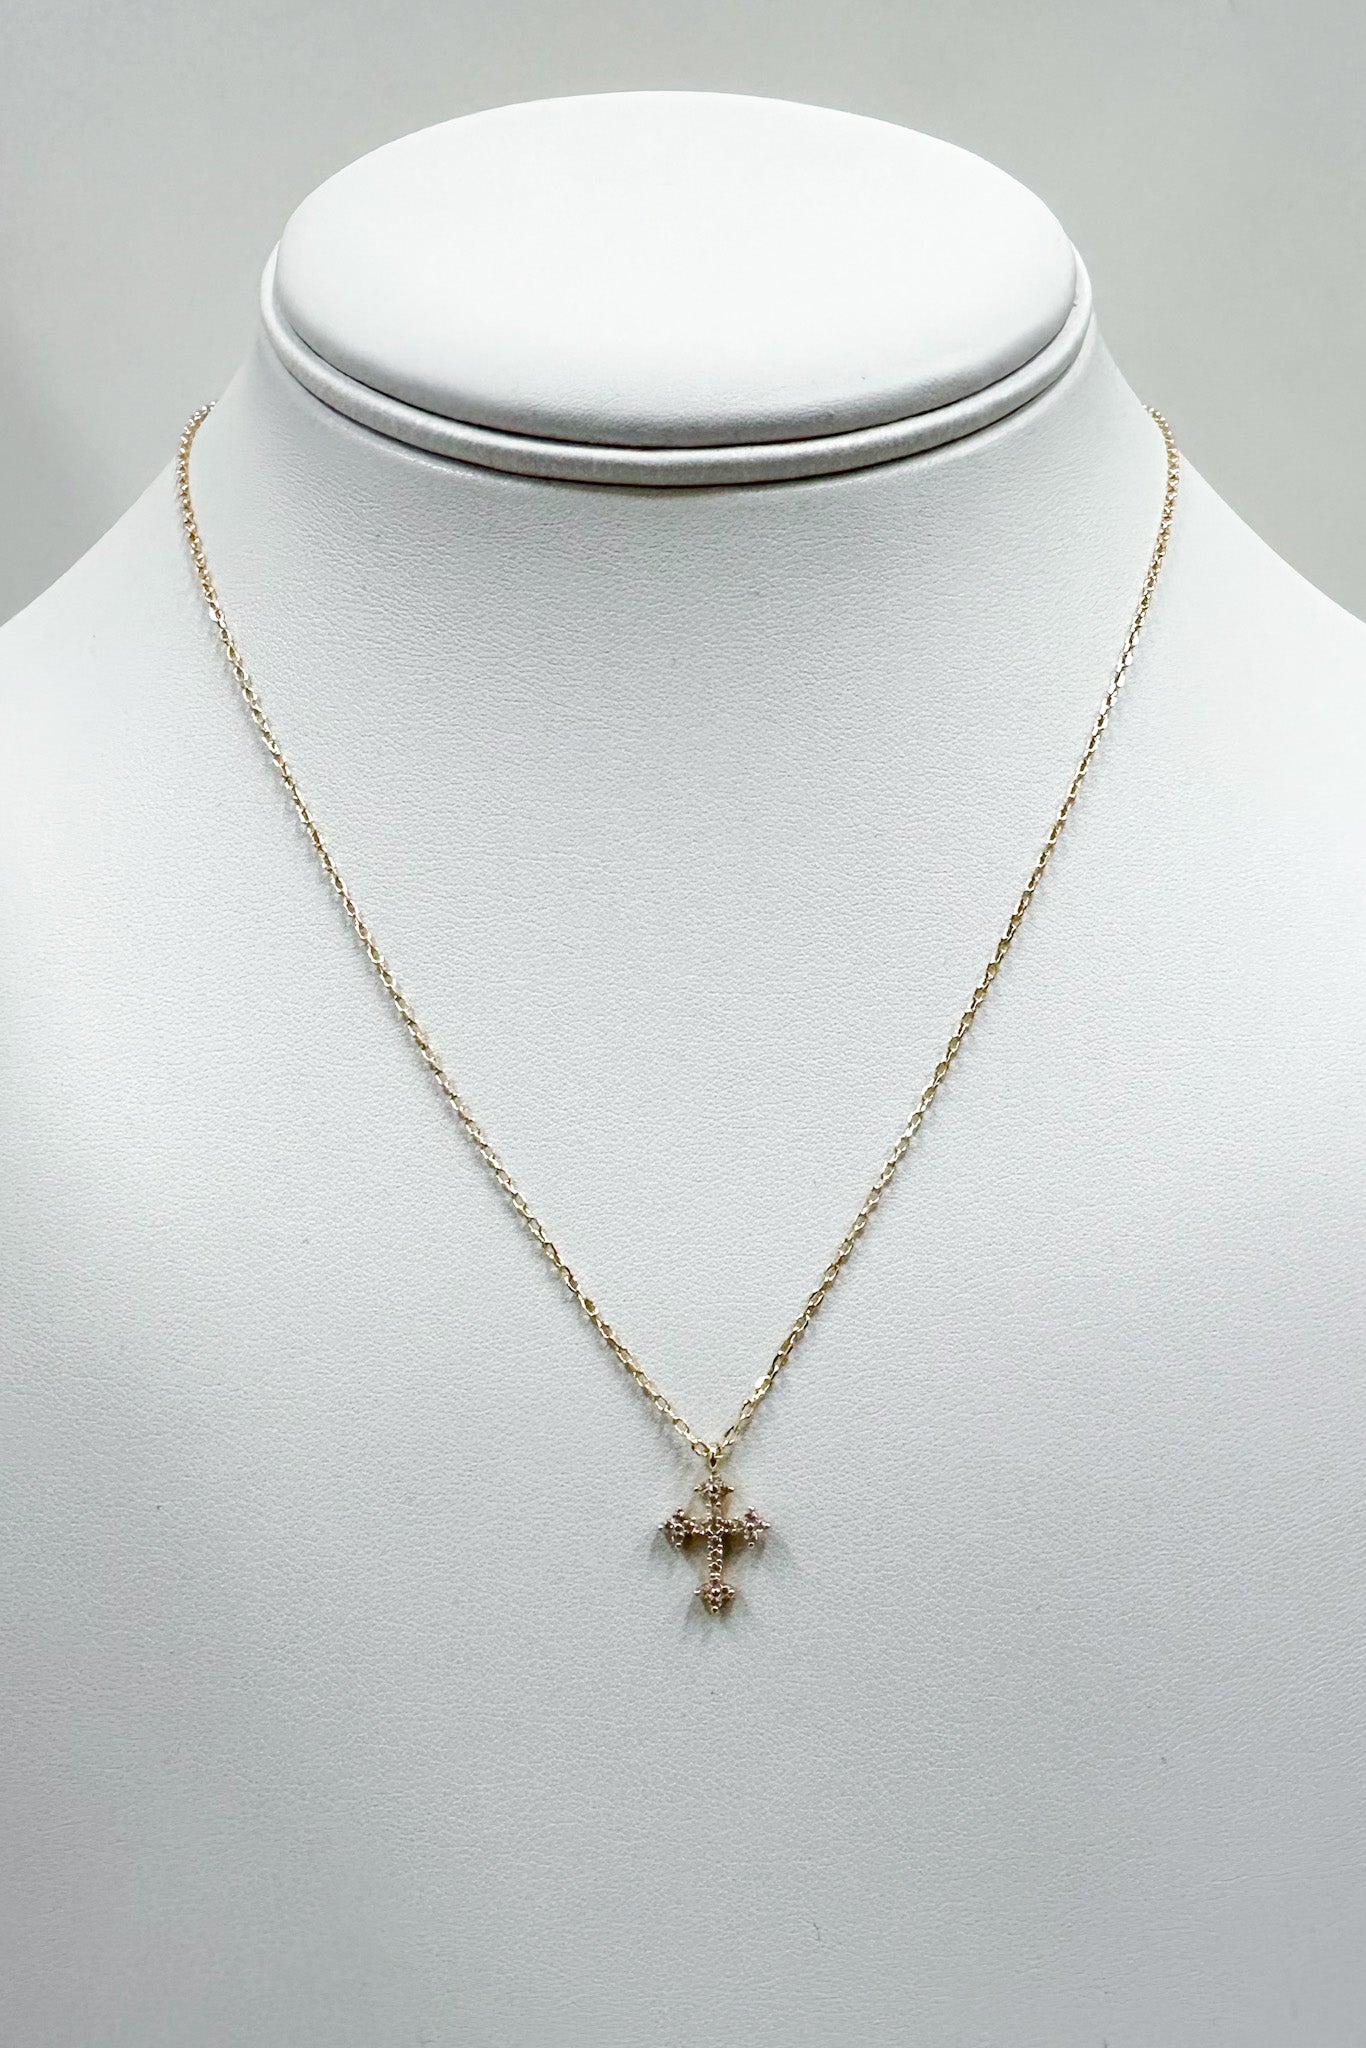  Salena Crystal Cross Necklace - Madison and Mallory